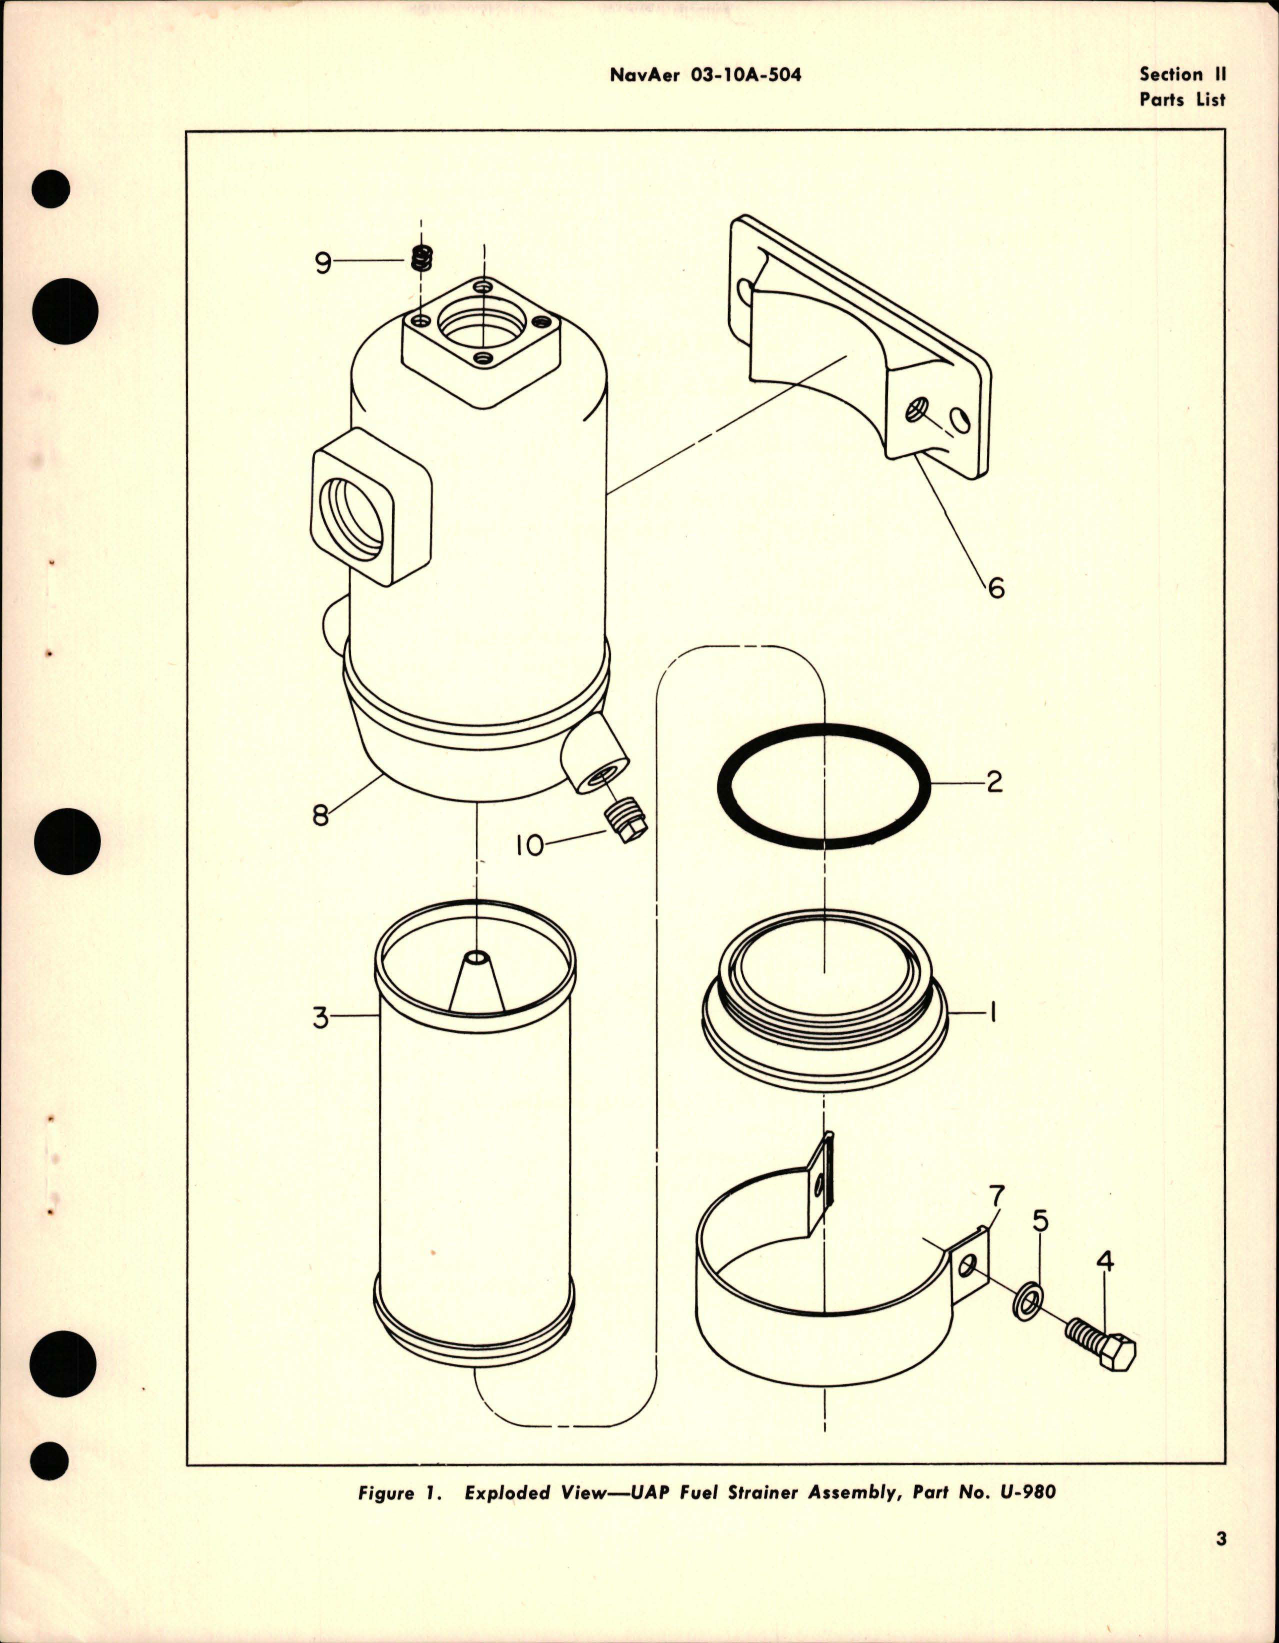 Sample page 5 from AirCorps Library document: Overhaul Instructions with Parts Catalog for Fuel Strainer - Part U-980